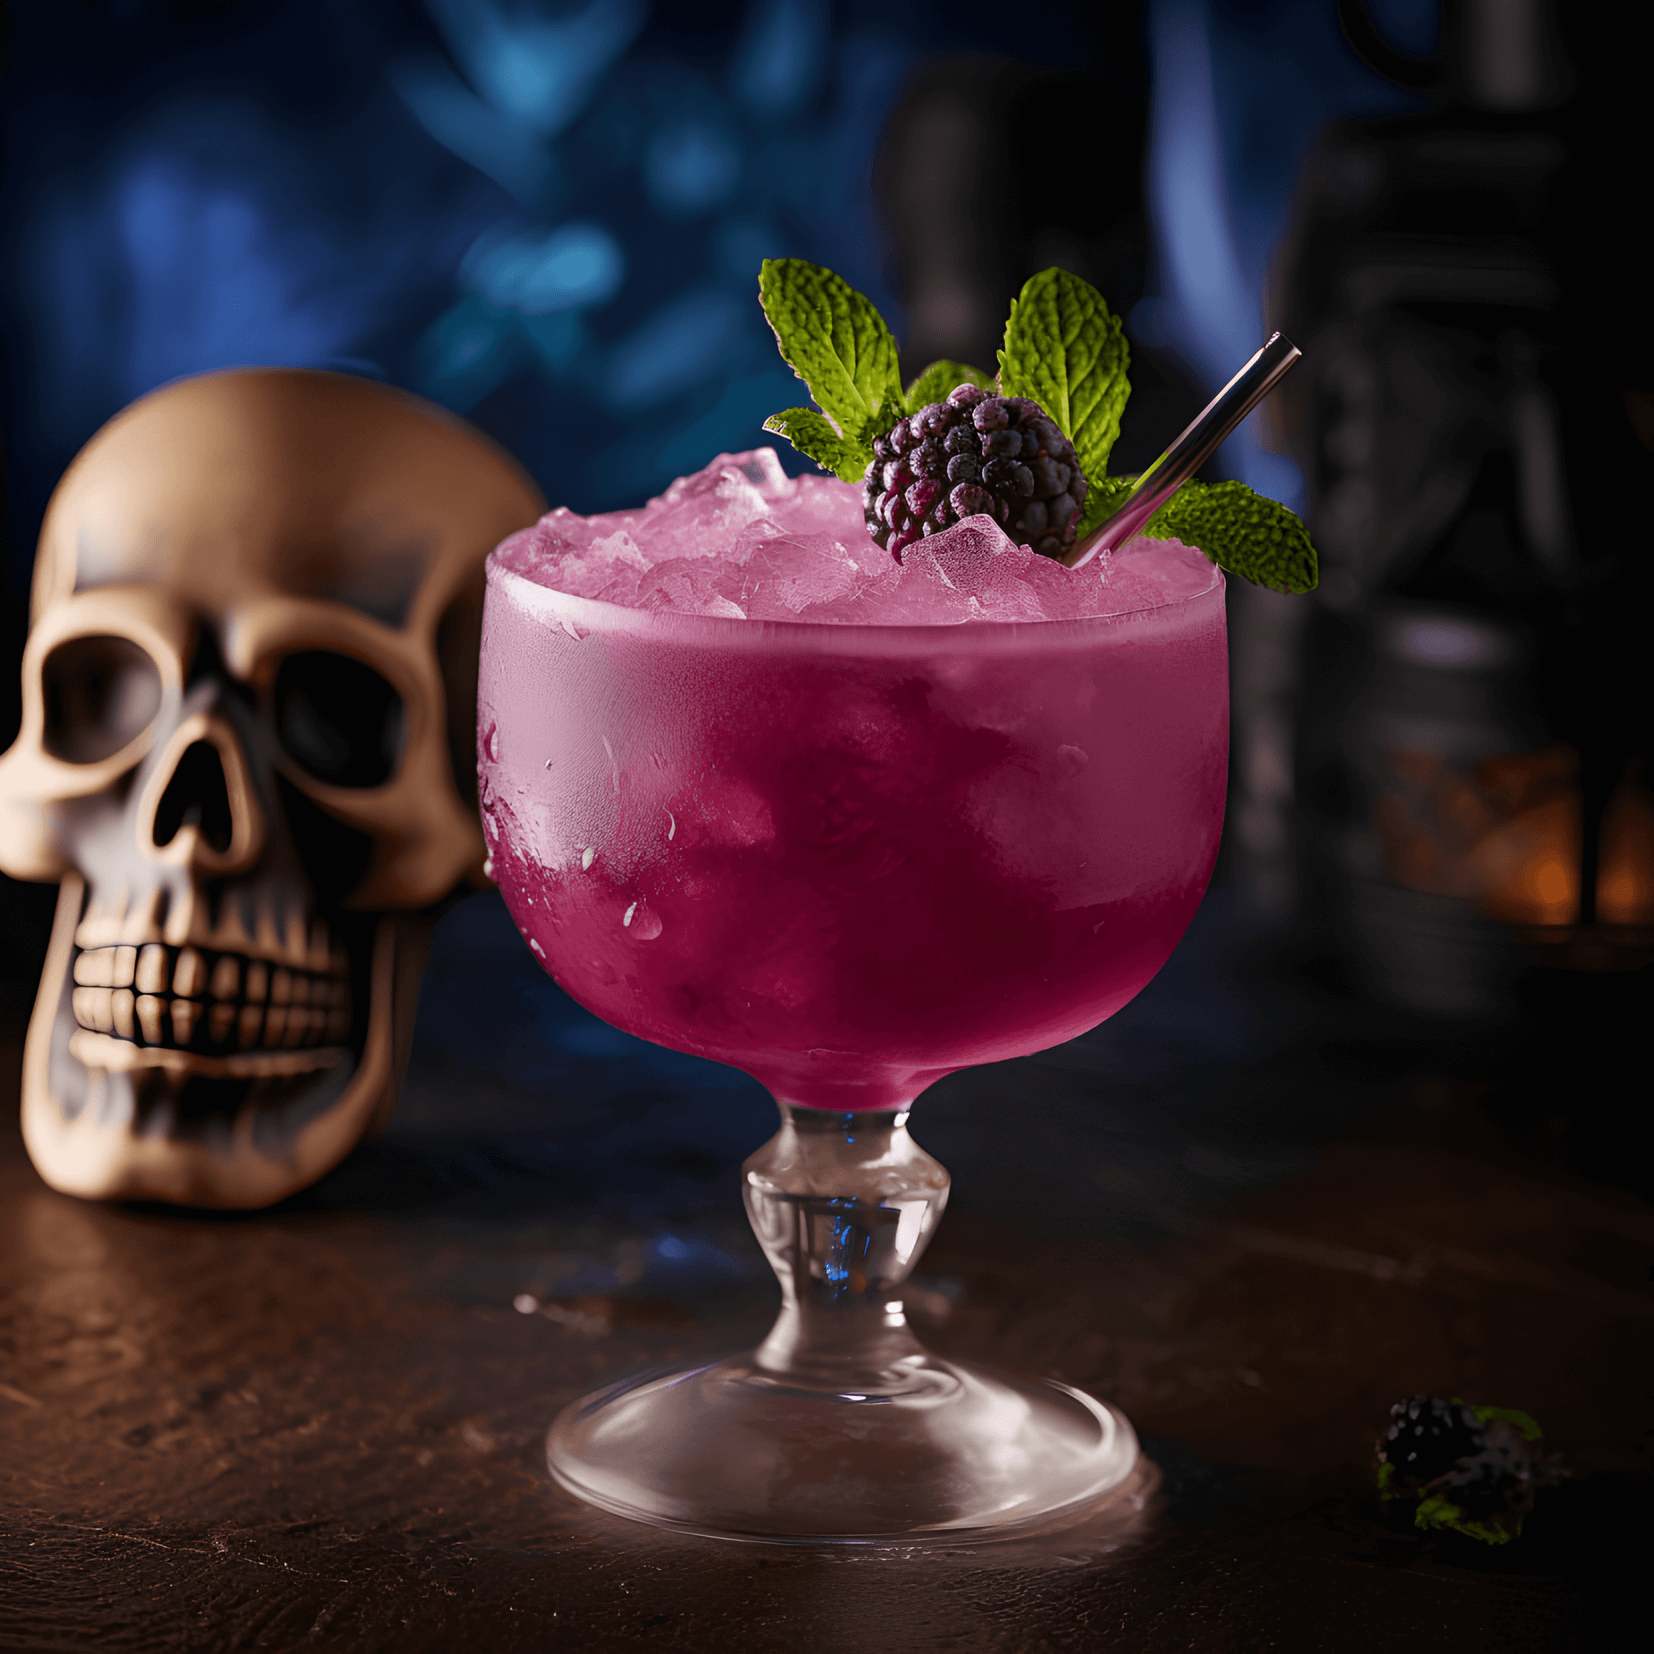 Witch Doctor Cocktail Recipe - The Witch Doctor cocktail offers a complex and intriguing taste profile, featuring a blend of sweet, sour, and slightly spicy flavors. The combination of fruity and herbal ingredients creates a unique and enchanting experience for the palate.